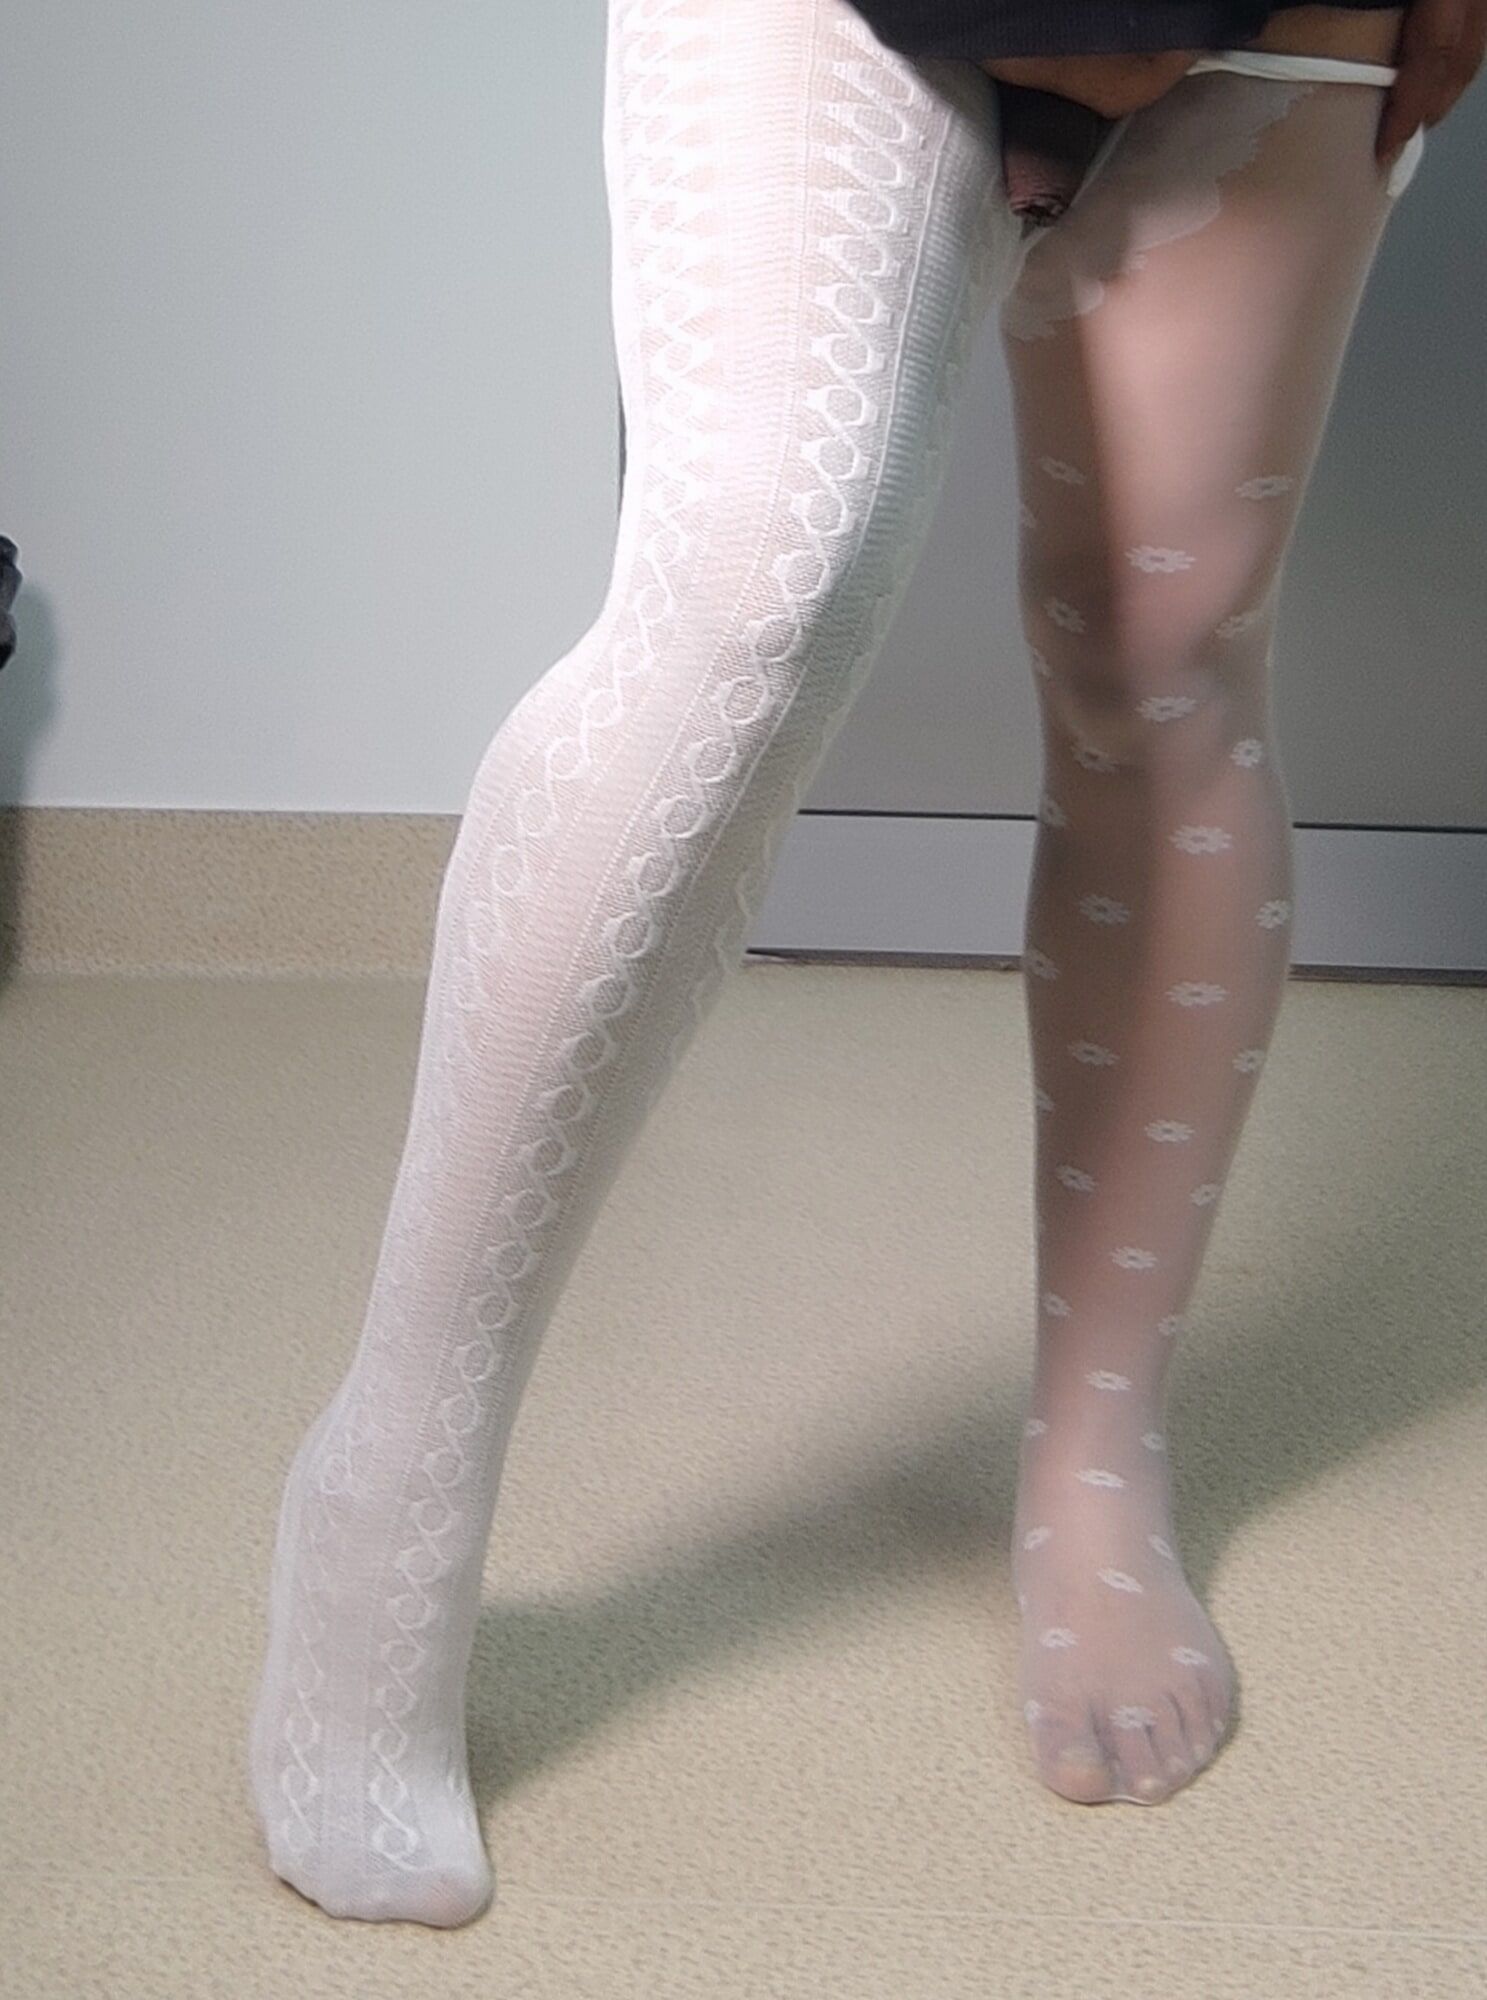 Another pair of white pantyhose on my feet,my favorites. #16